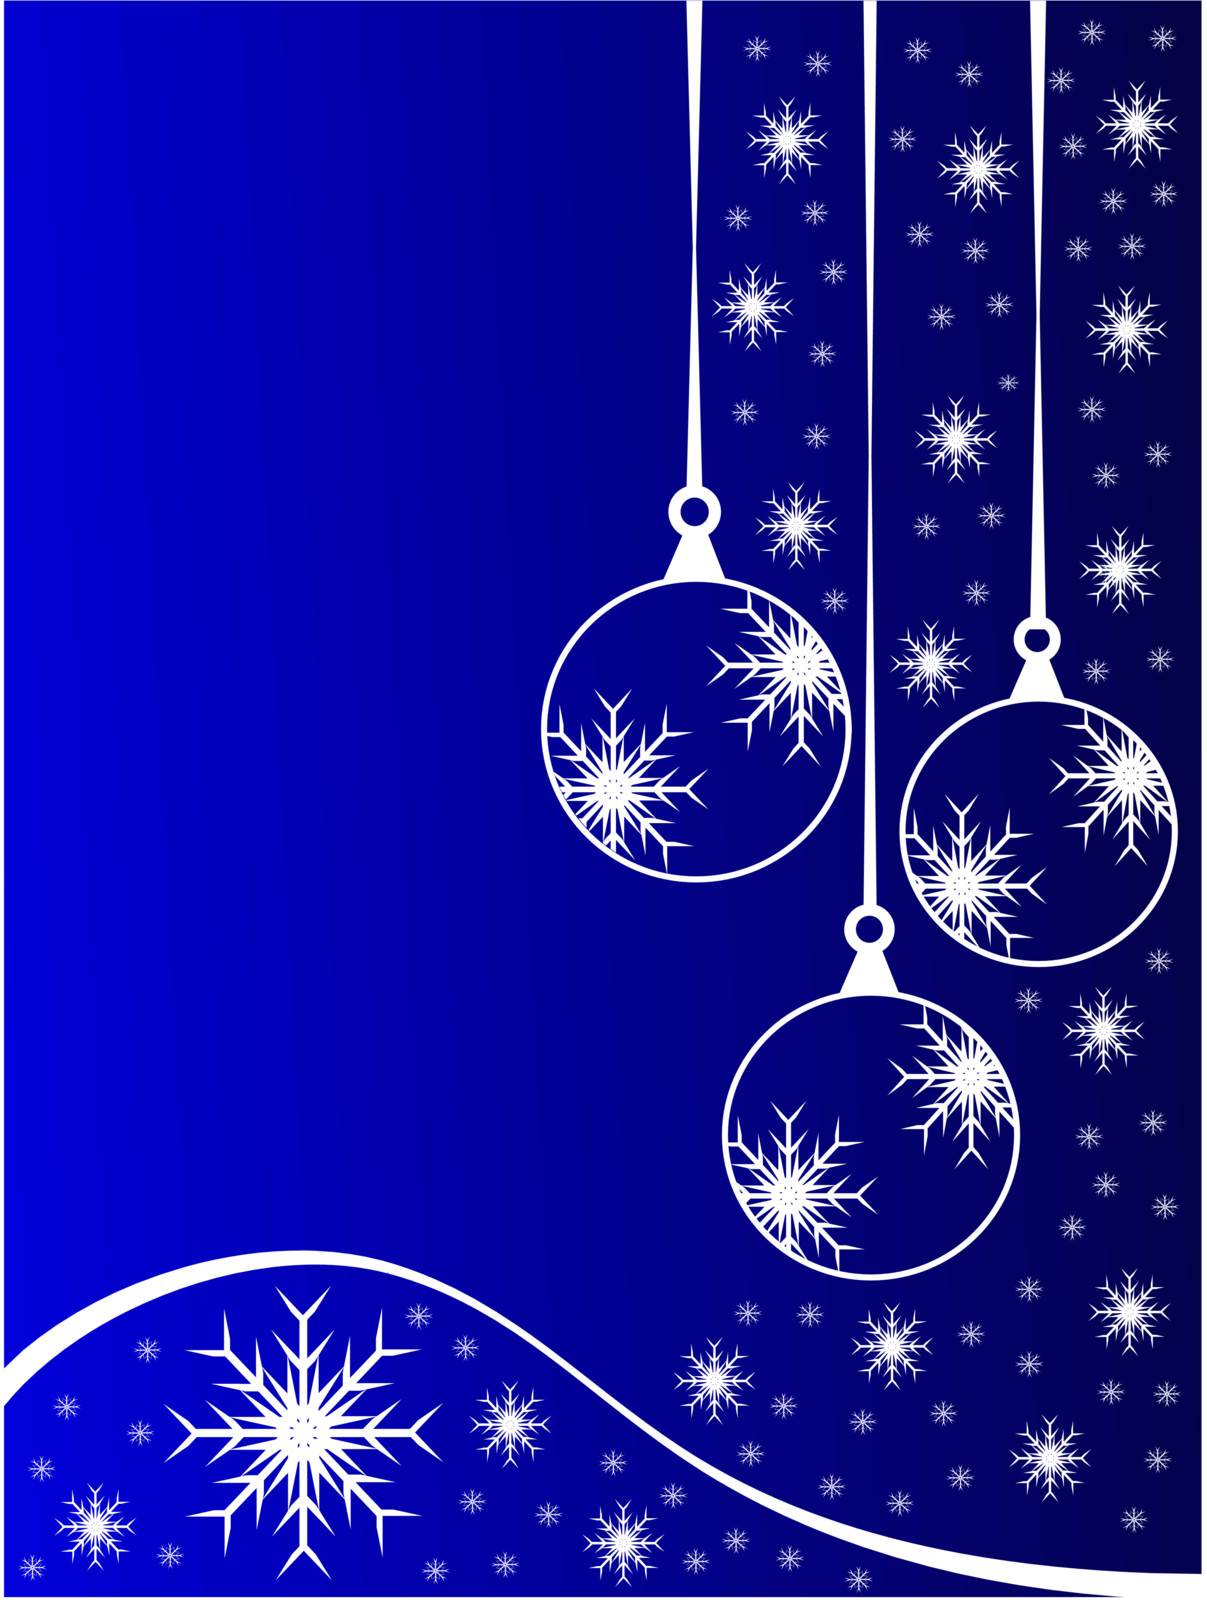 An abstract Christmas vector illustration with clear white outline baubles on a blue backdrop with white snowflakes and room for text